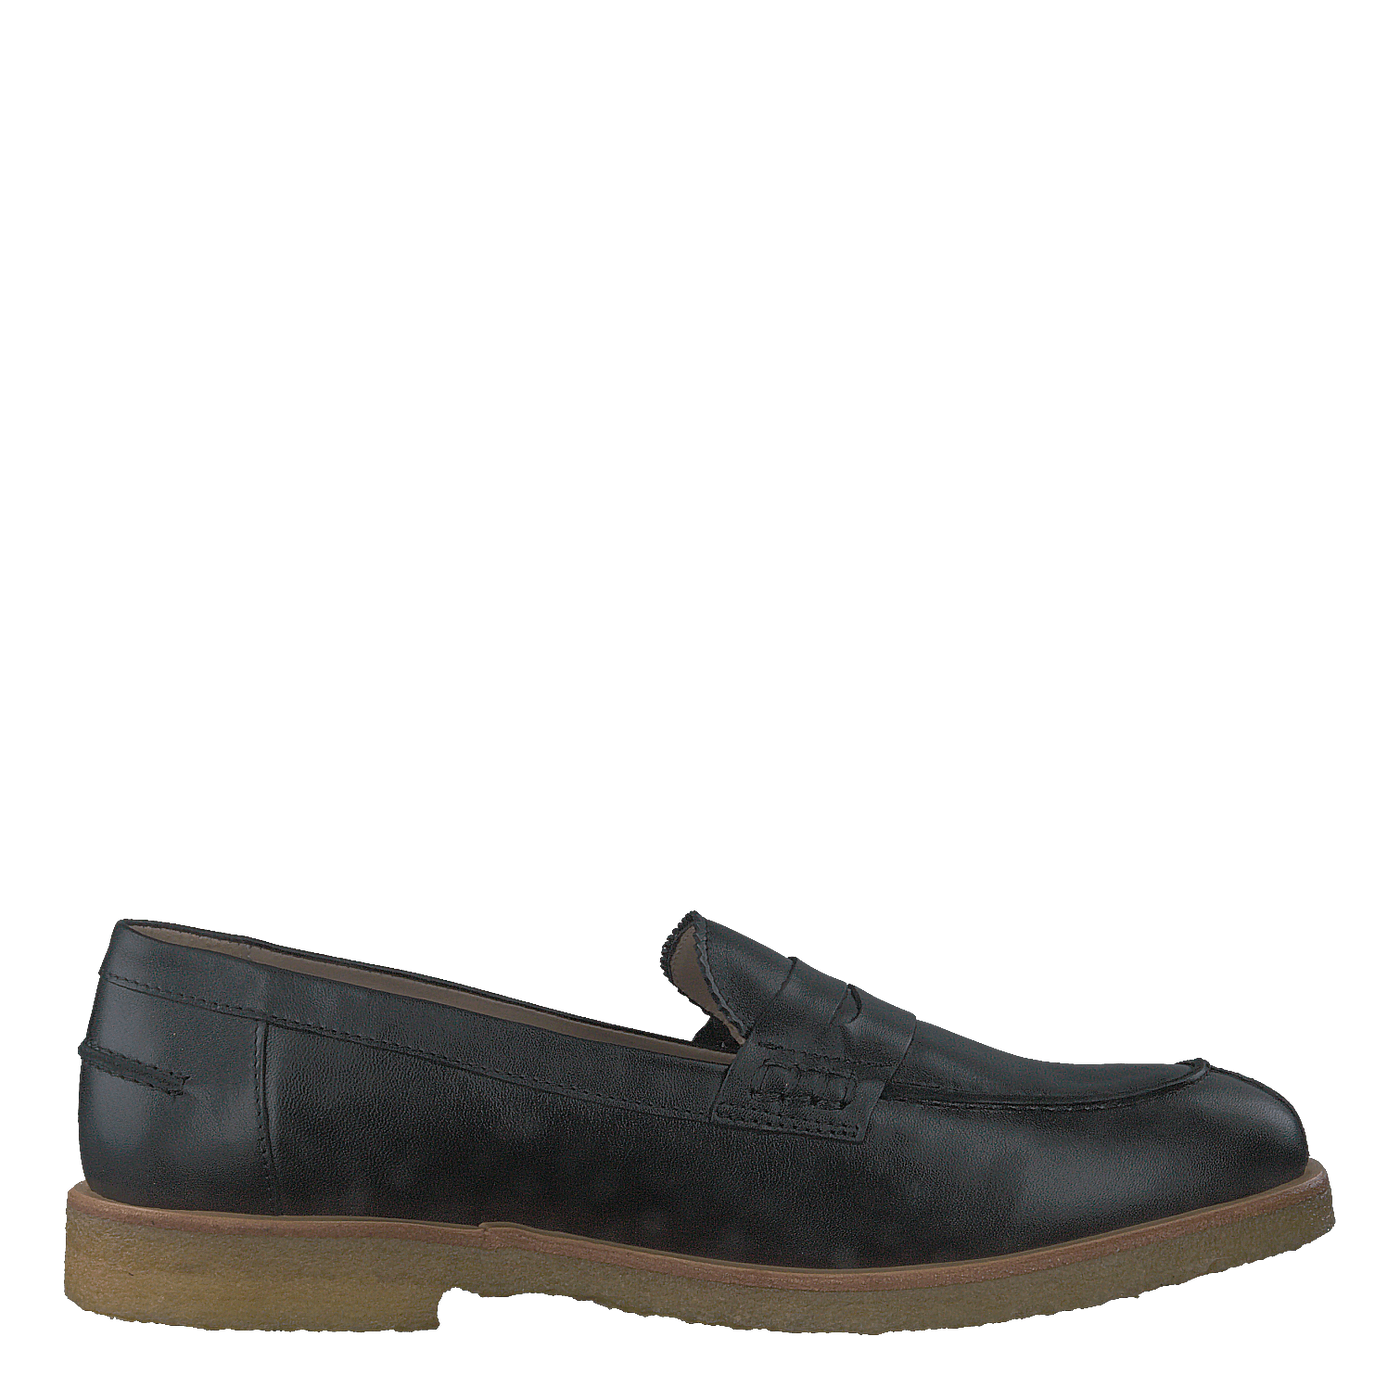 Classic Loafer With Soft Heelc Black